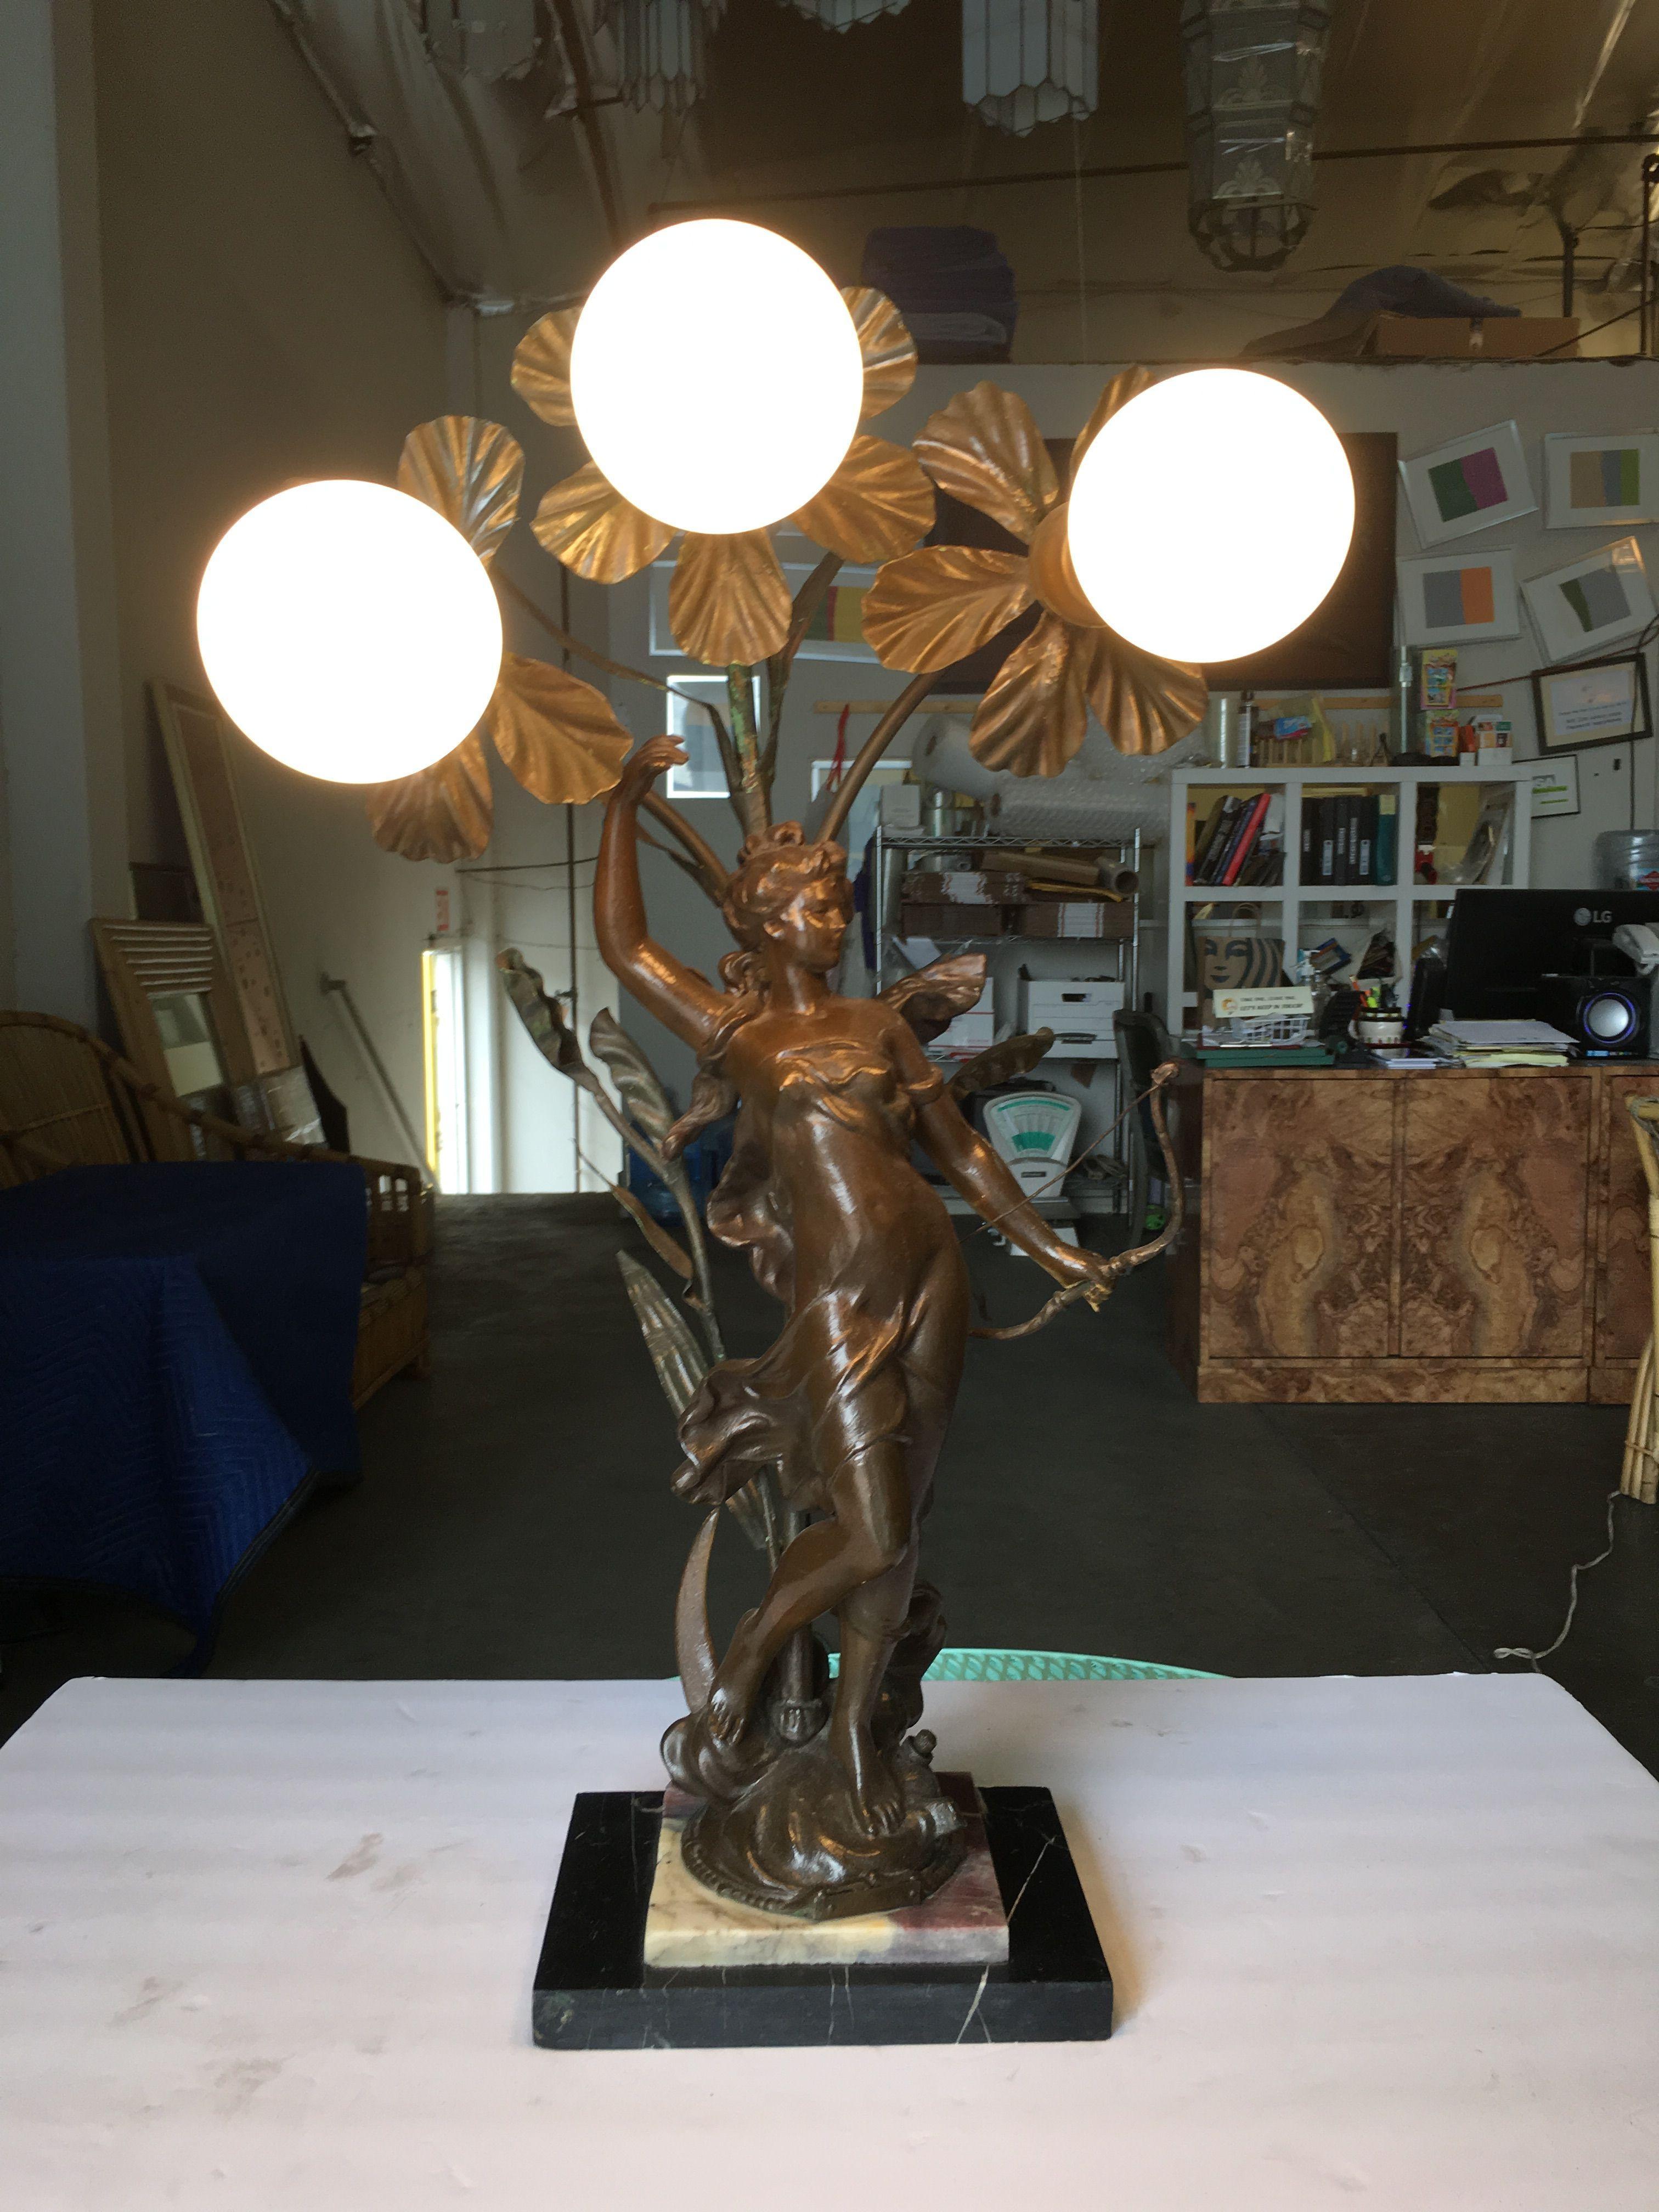 Early three bulb Art Nouveau figural table lamp featuring a beautiful figural casted bronze female fixed to a two-piece, two-tone marble base topped with an organic freeform floral featuring 3 standard light sockets.